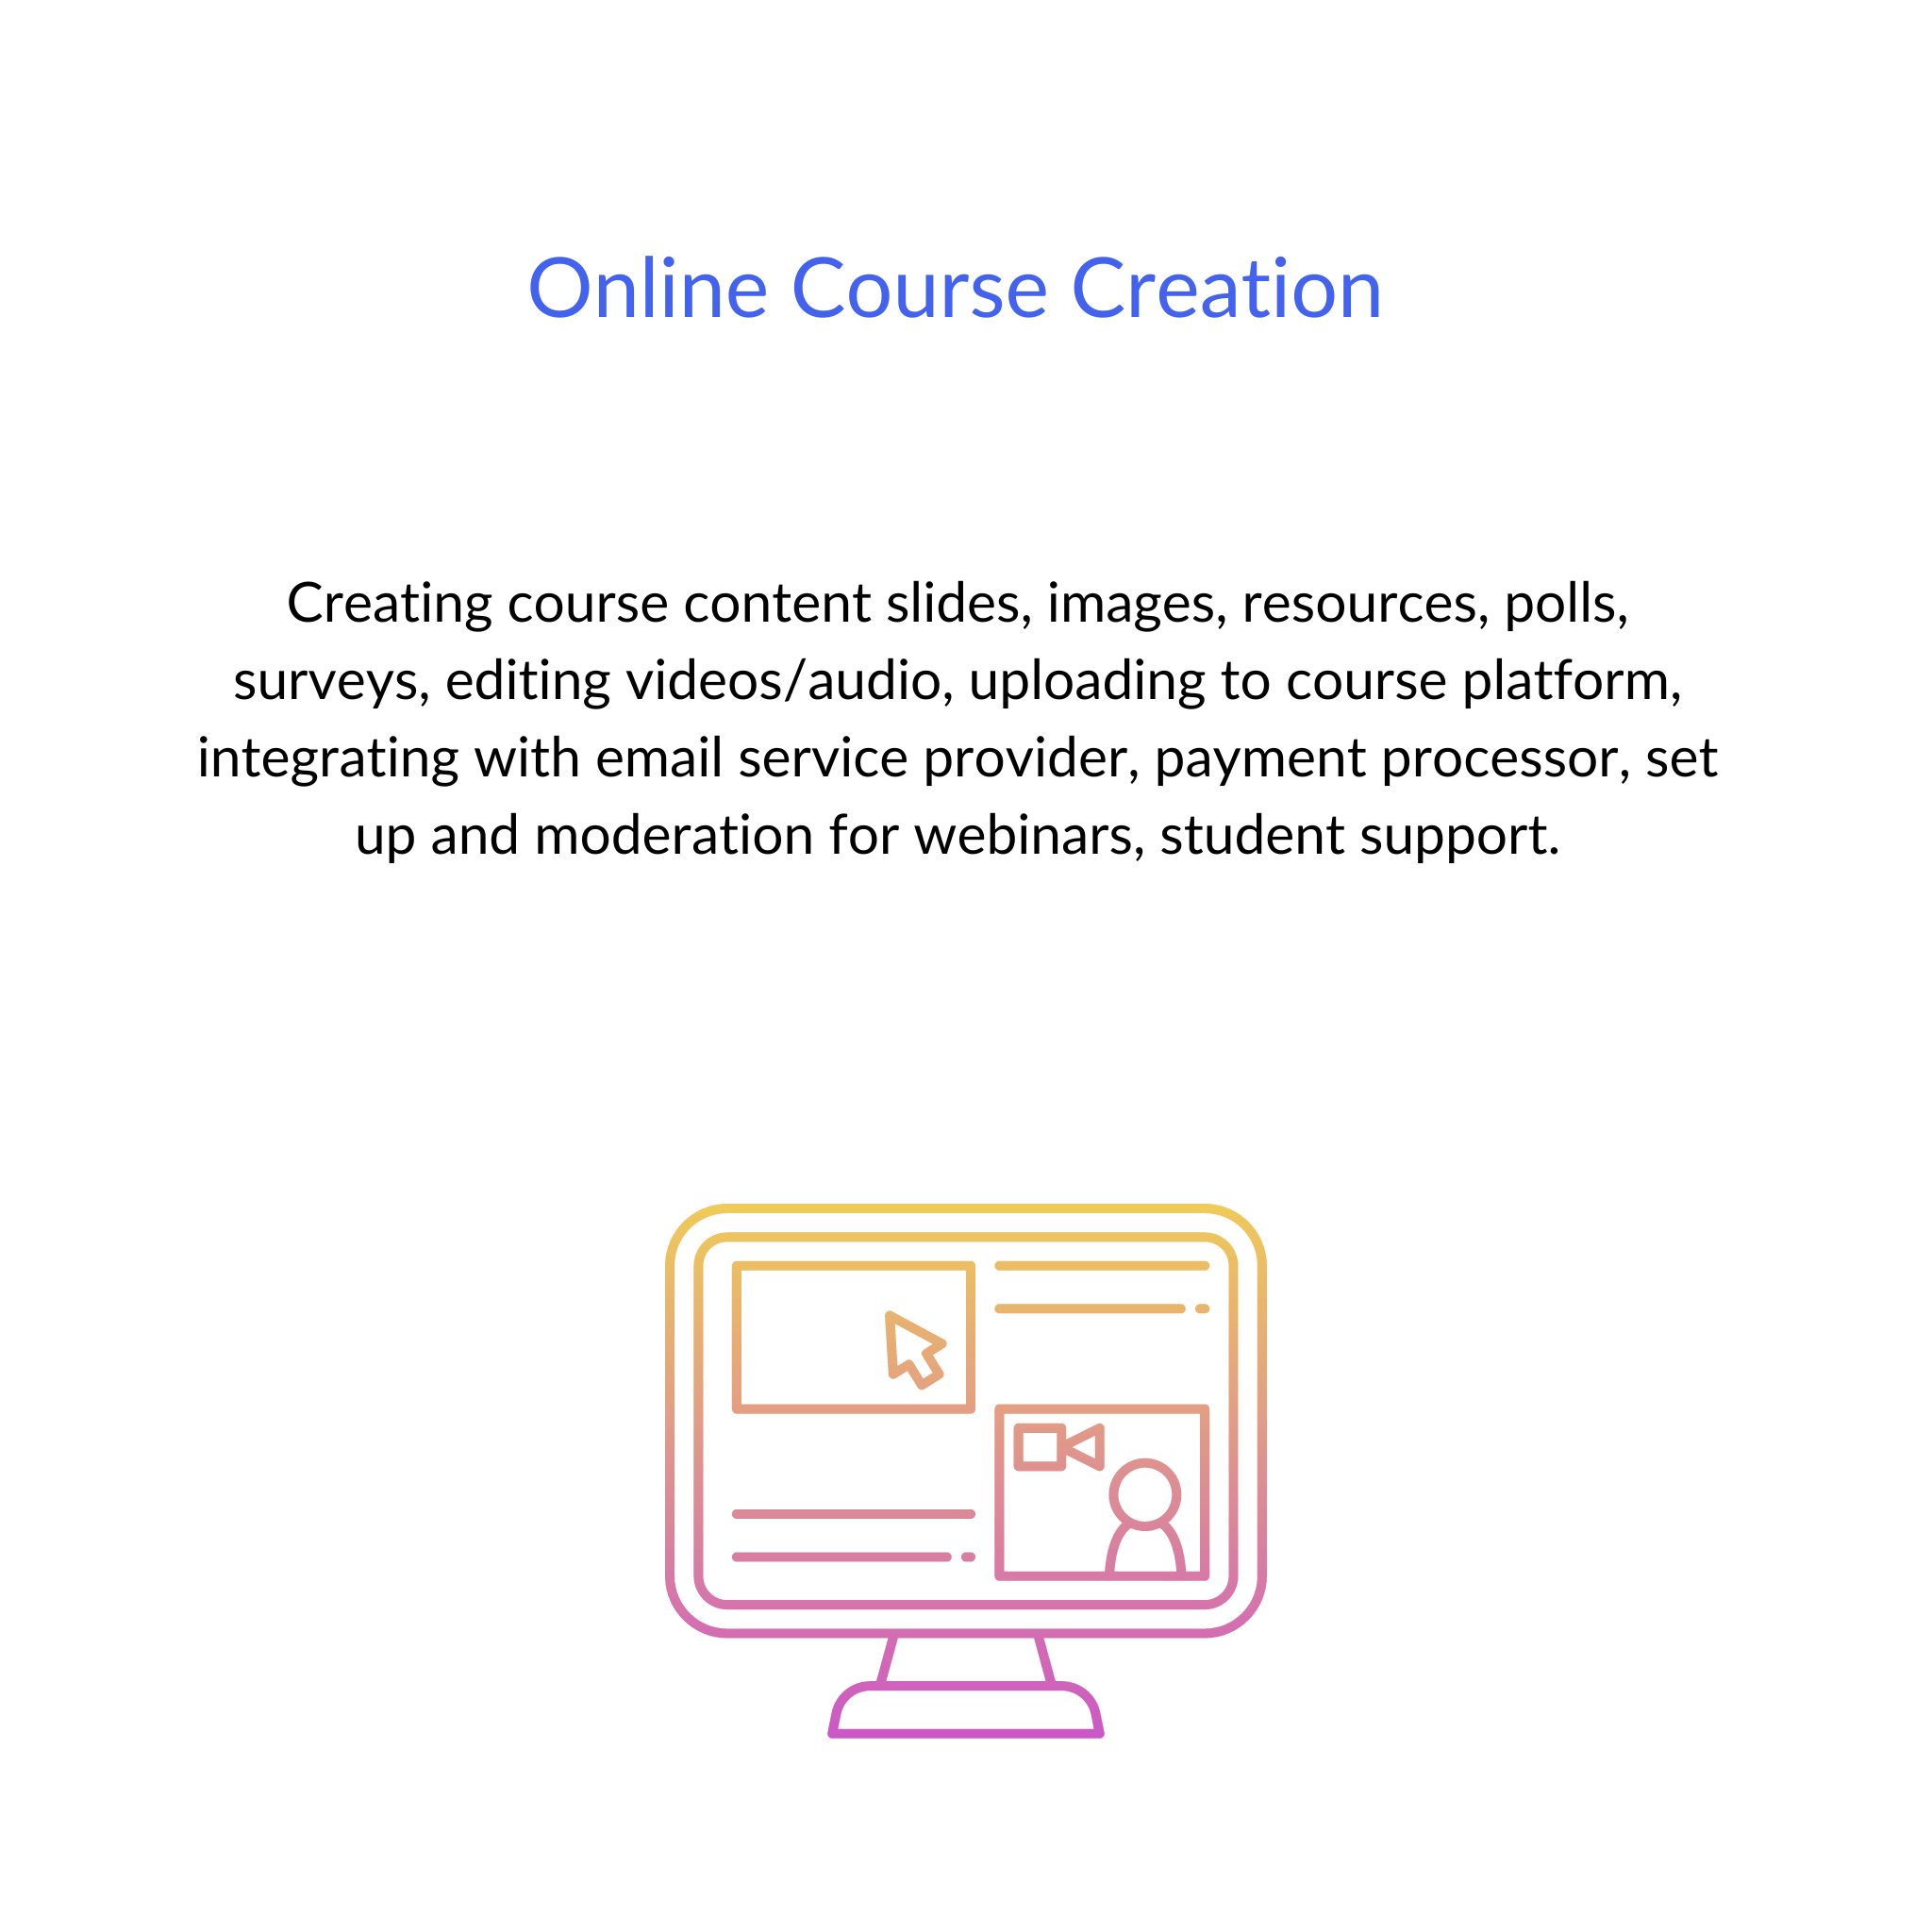 Online Course Creation Service - CC Shared Services